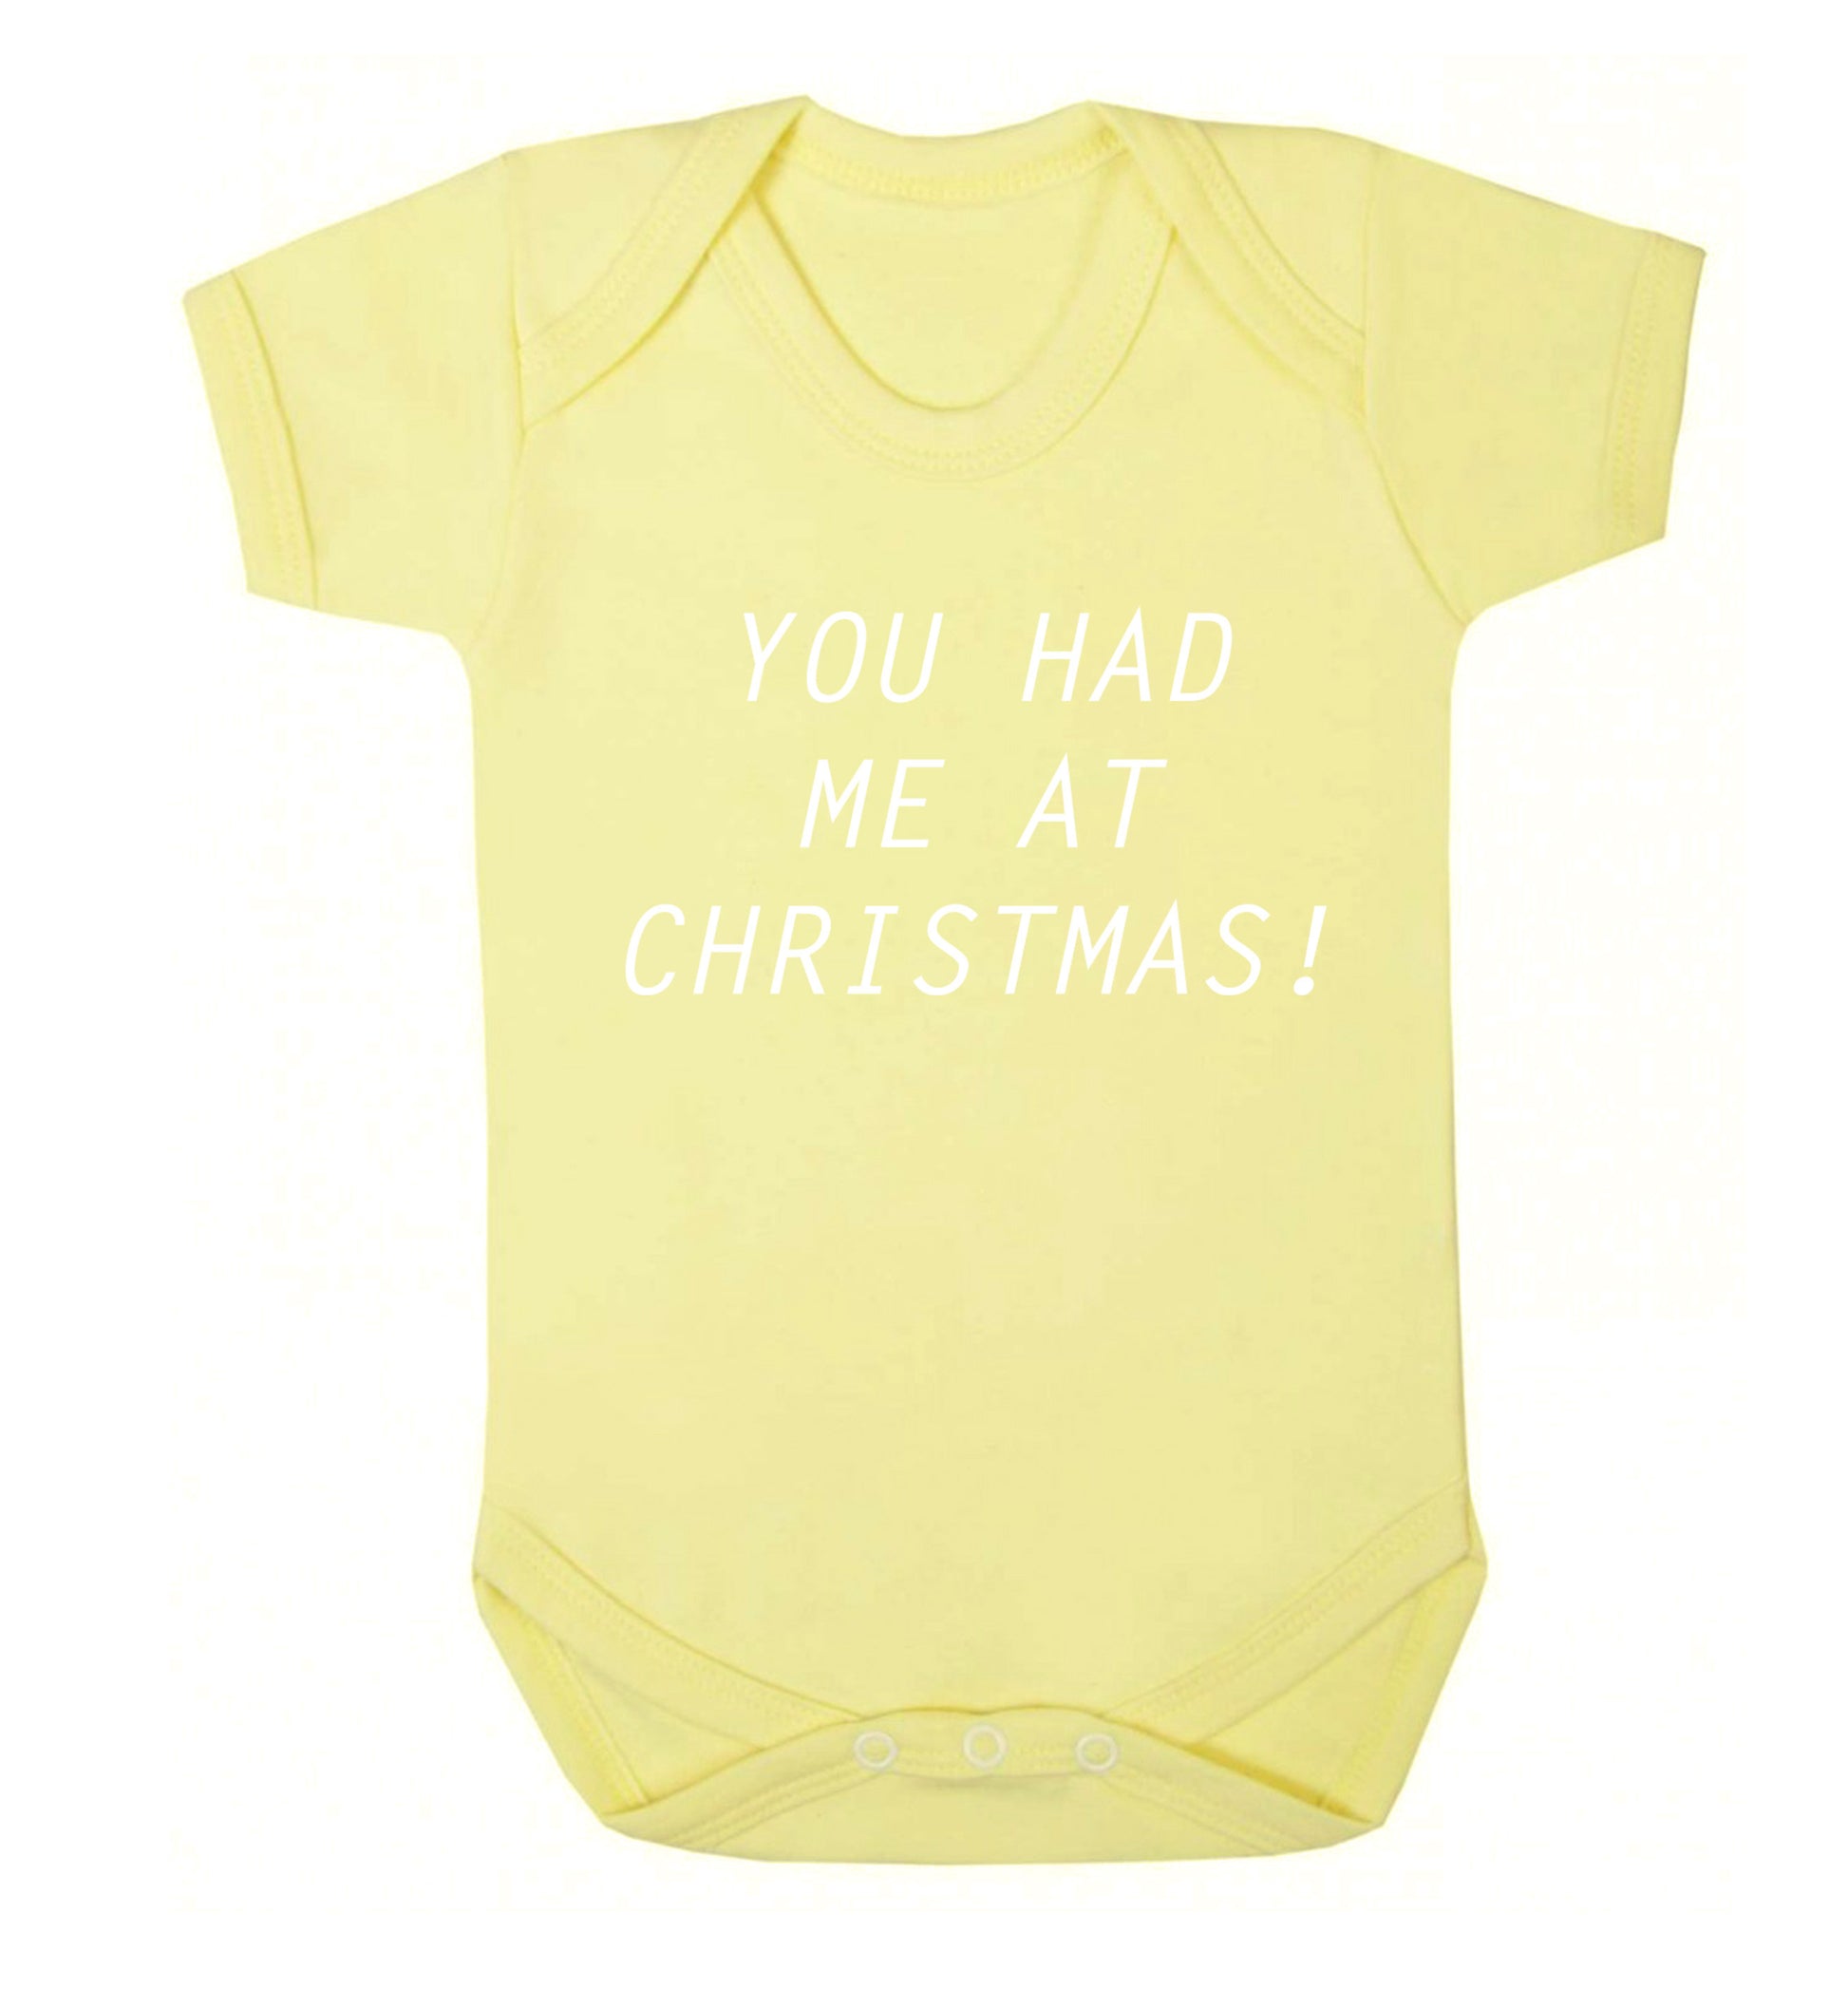 You had me at Christmas Baby Vest pale yellow 18-24 months